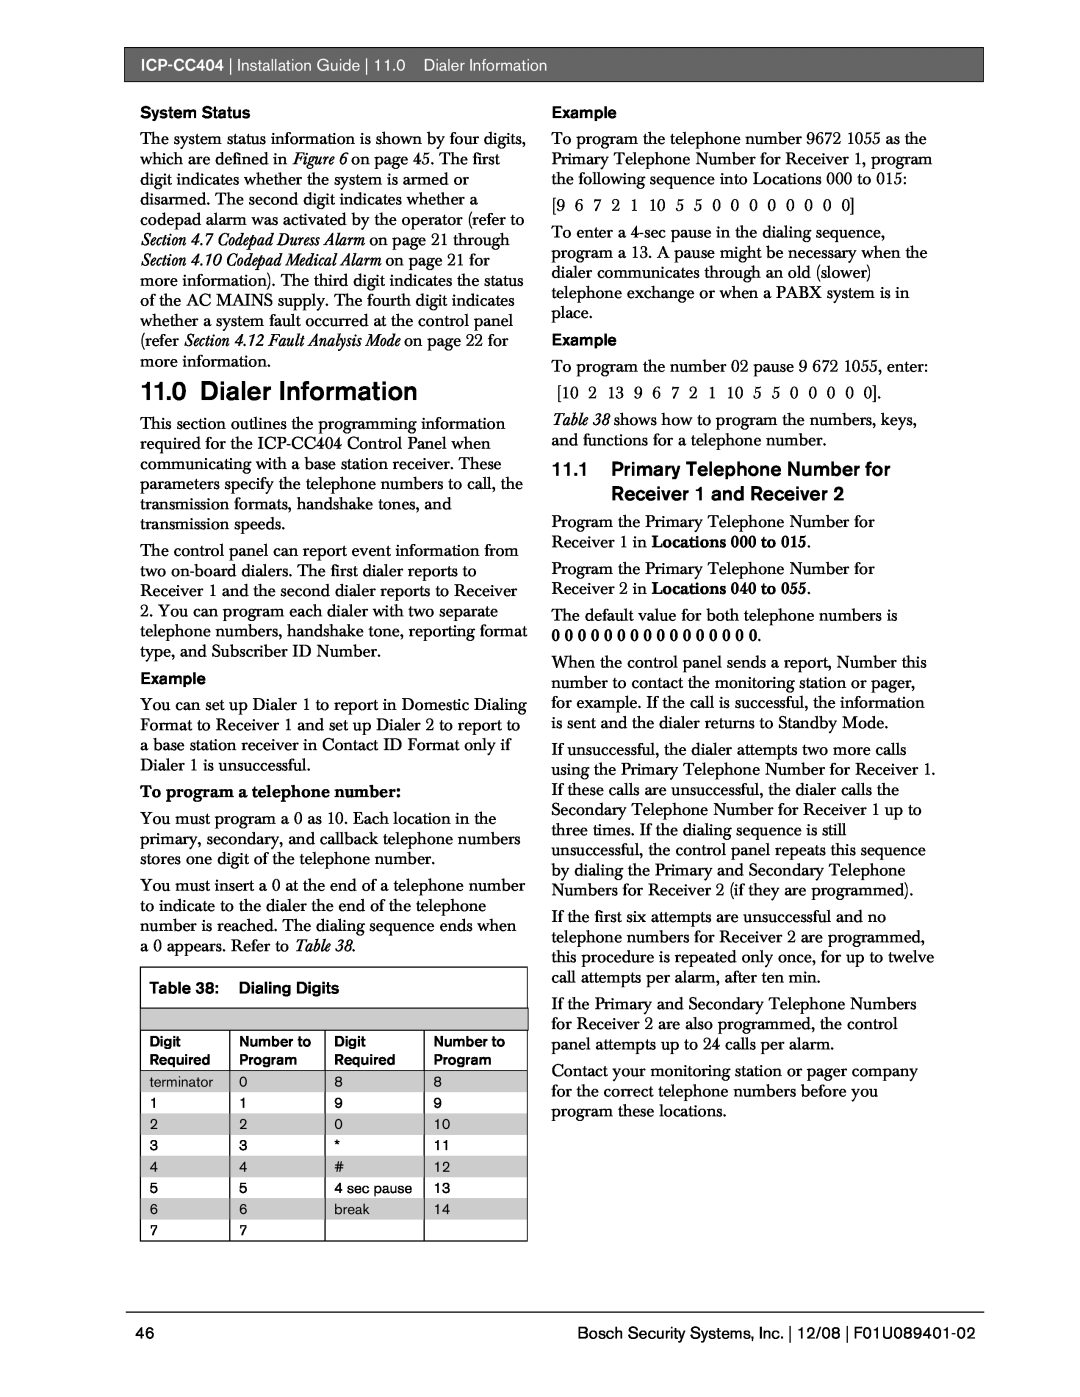 Bosch Appliances ICP-CC404 manual Dialer Information, System Status, Dialing Digits, Example 